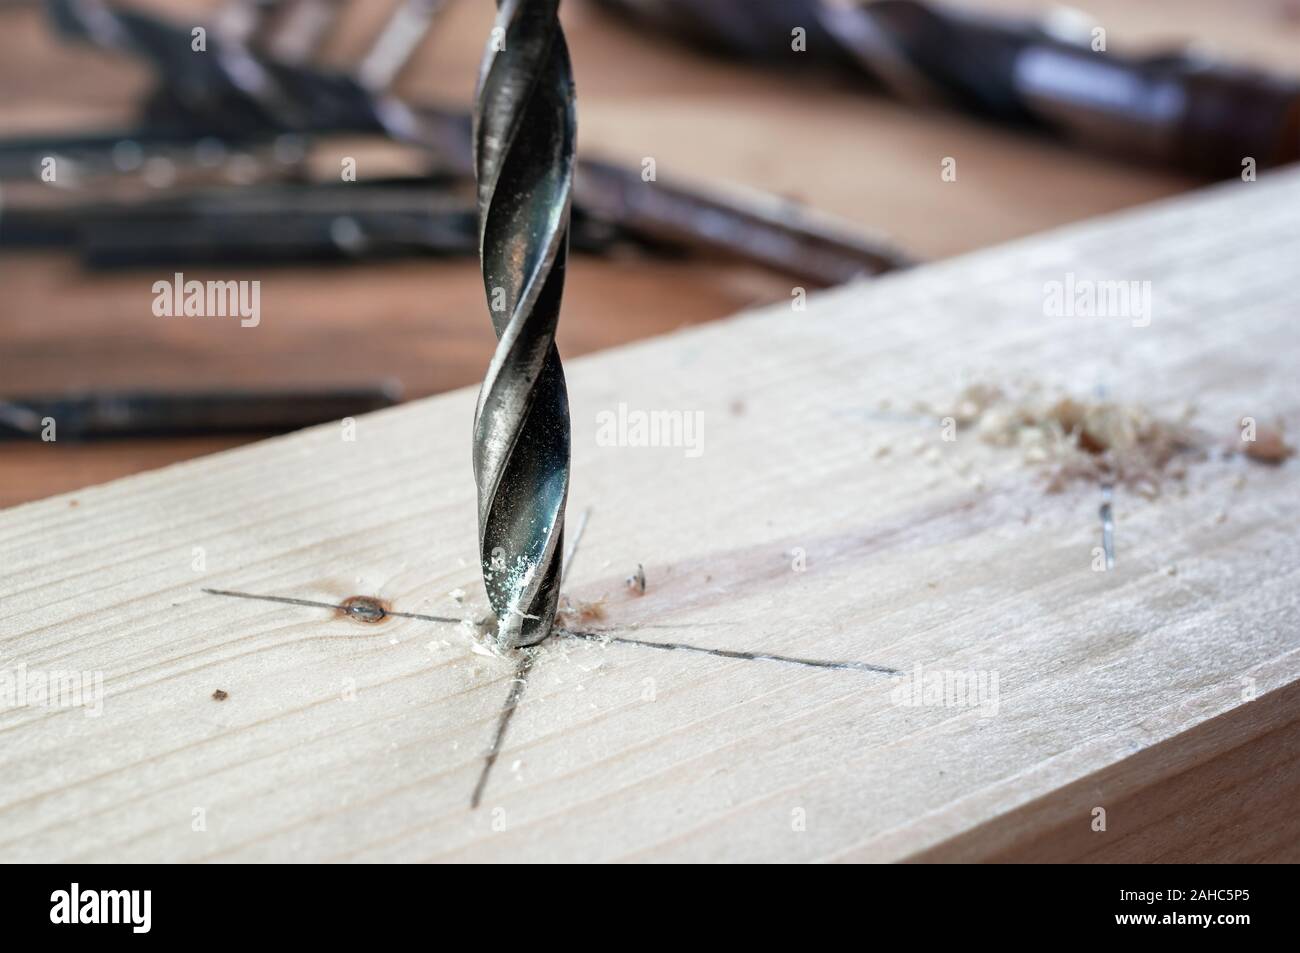 Drill work. Making hole into the wood with drill bit Stock Photo